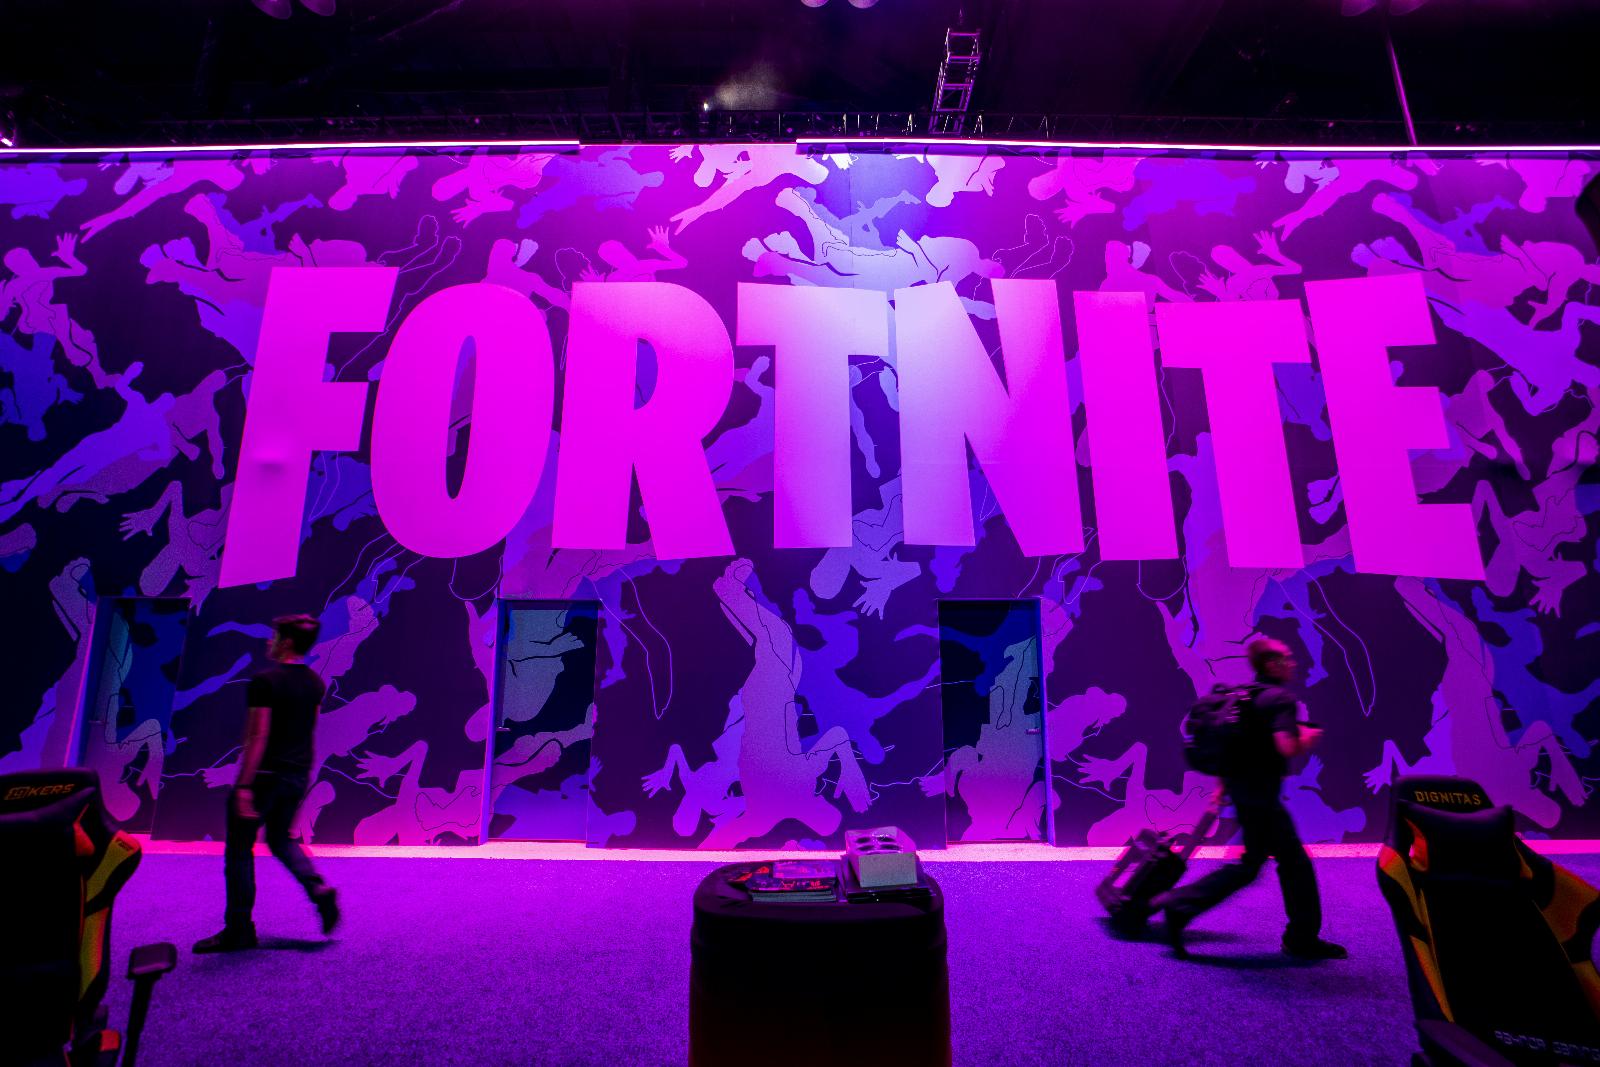 Fortnite on iOS and Google Play will be 18+ starting on January 30